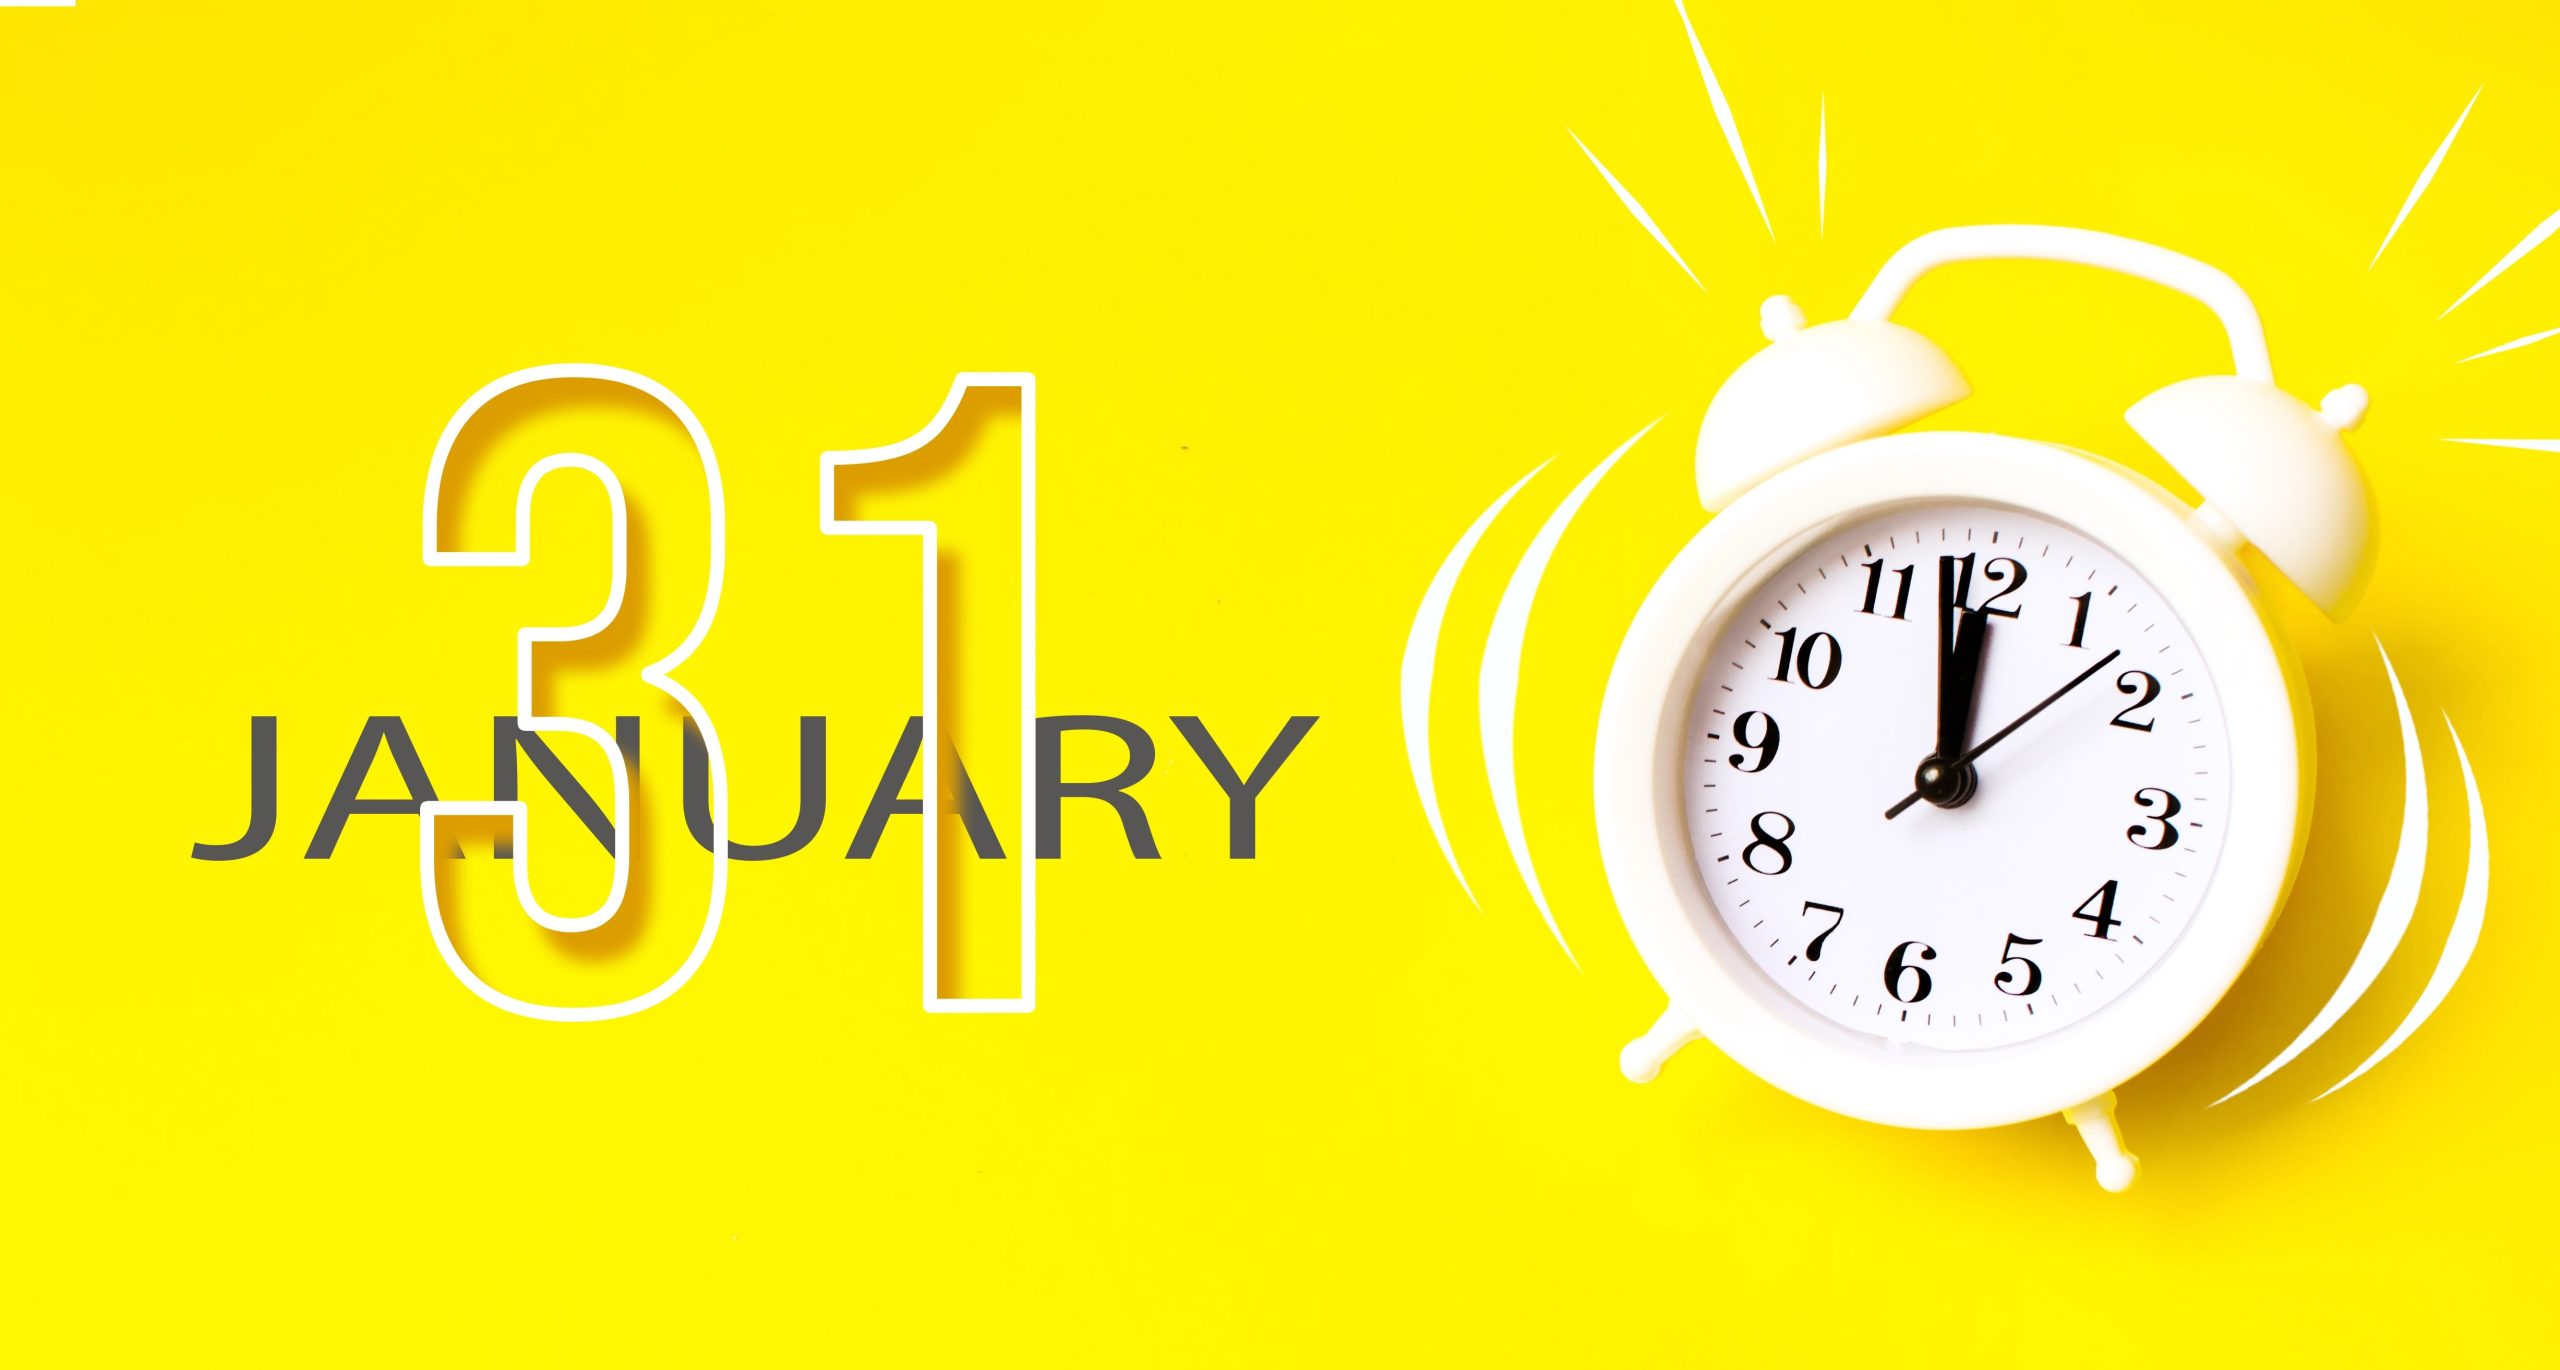 Don’t Miss Deadline Day for TBESS claims – 31 January